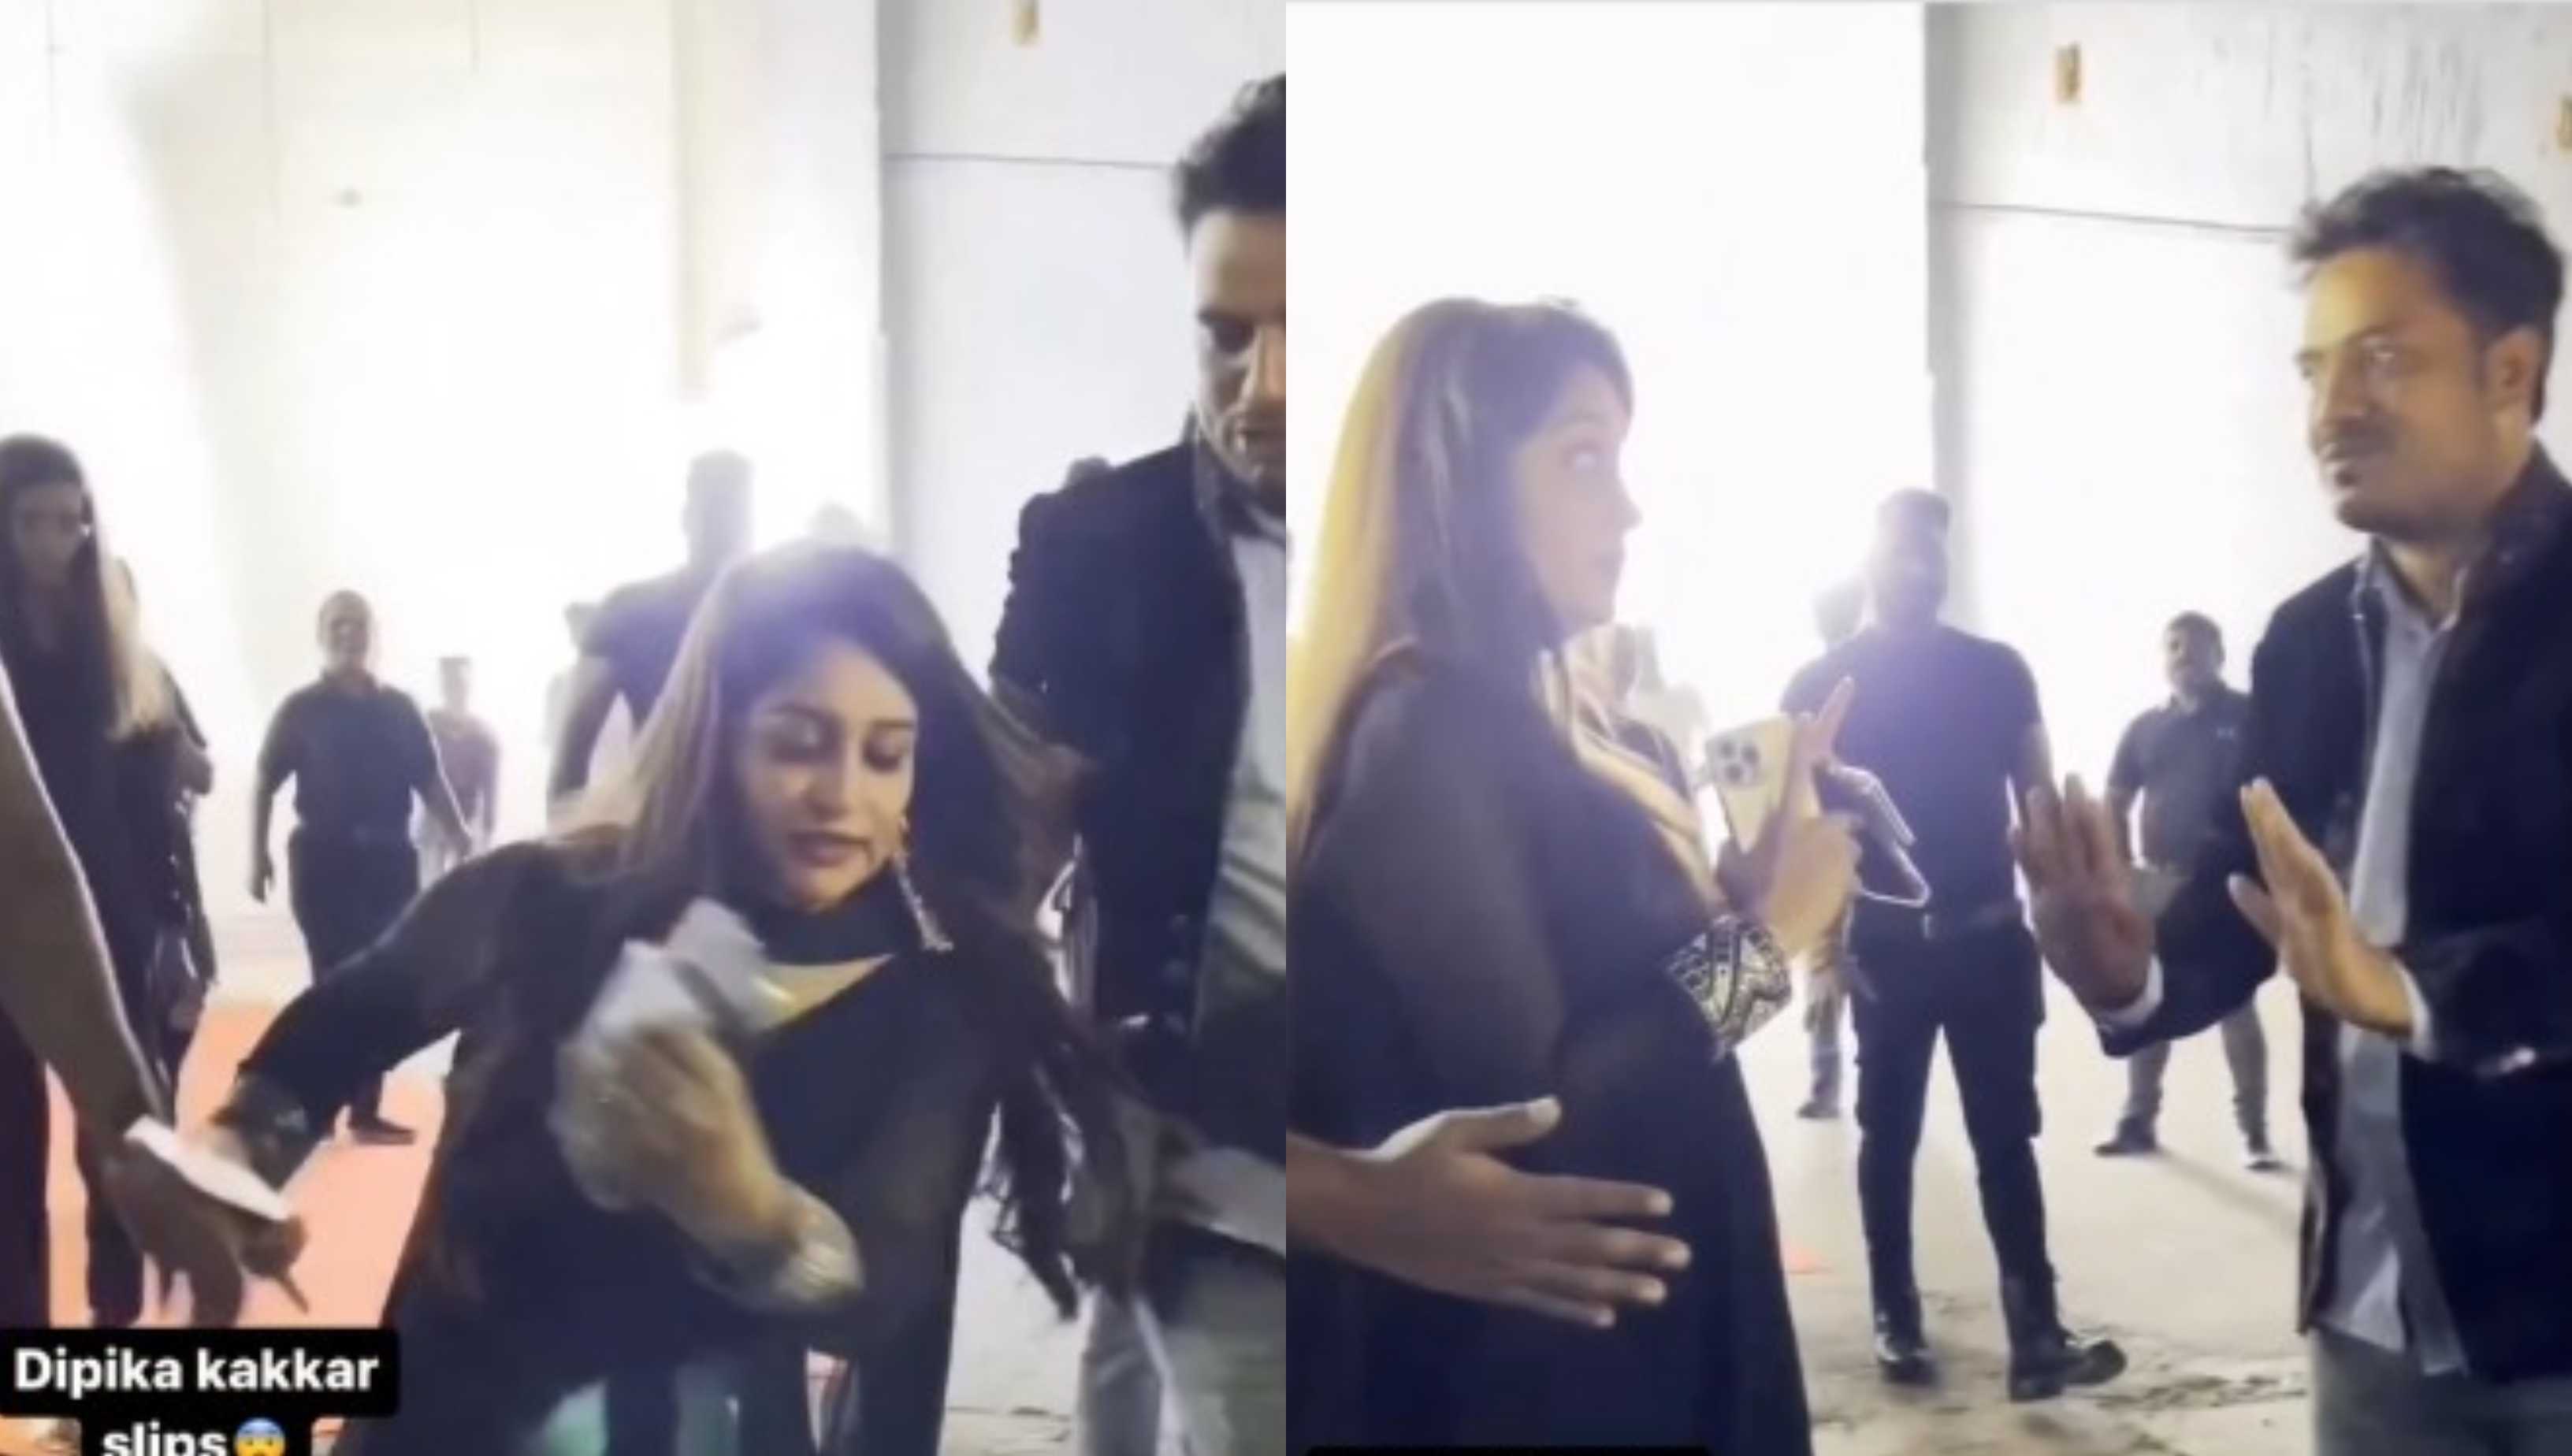 ‘What an arrogant woman’: Dipika Kakar gets brutally trolled for talking rudely to man who saved her from falling